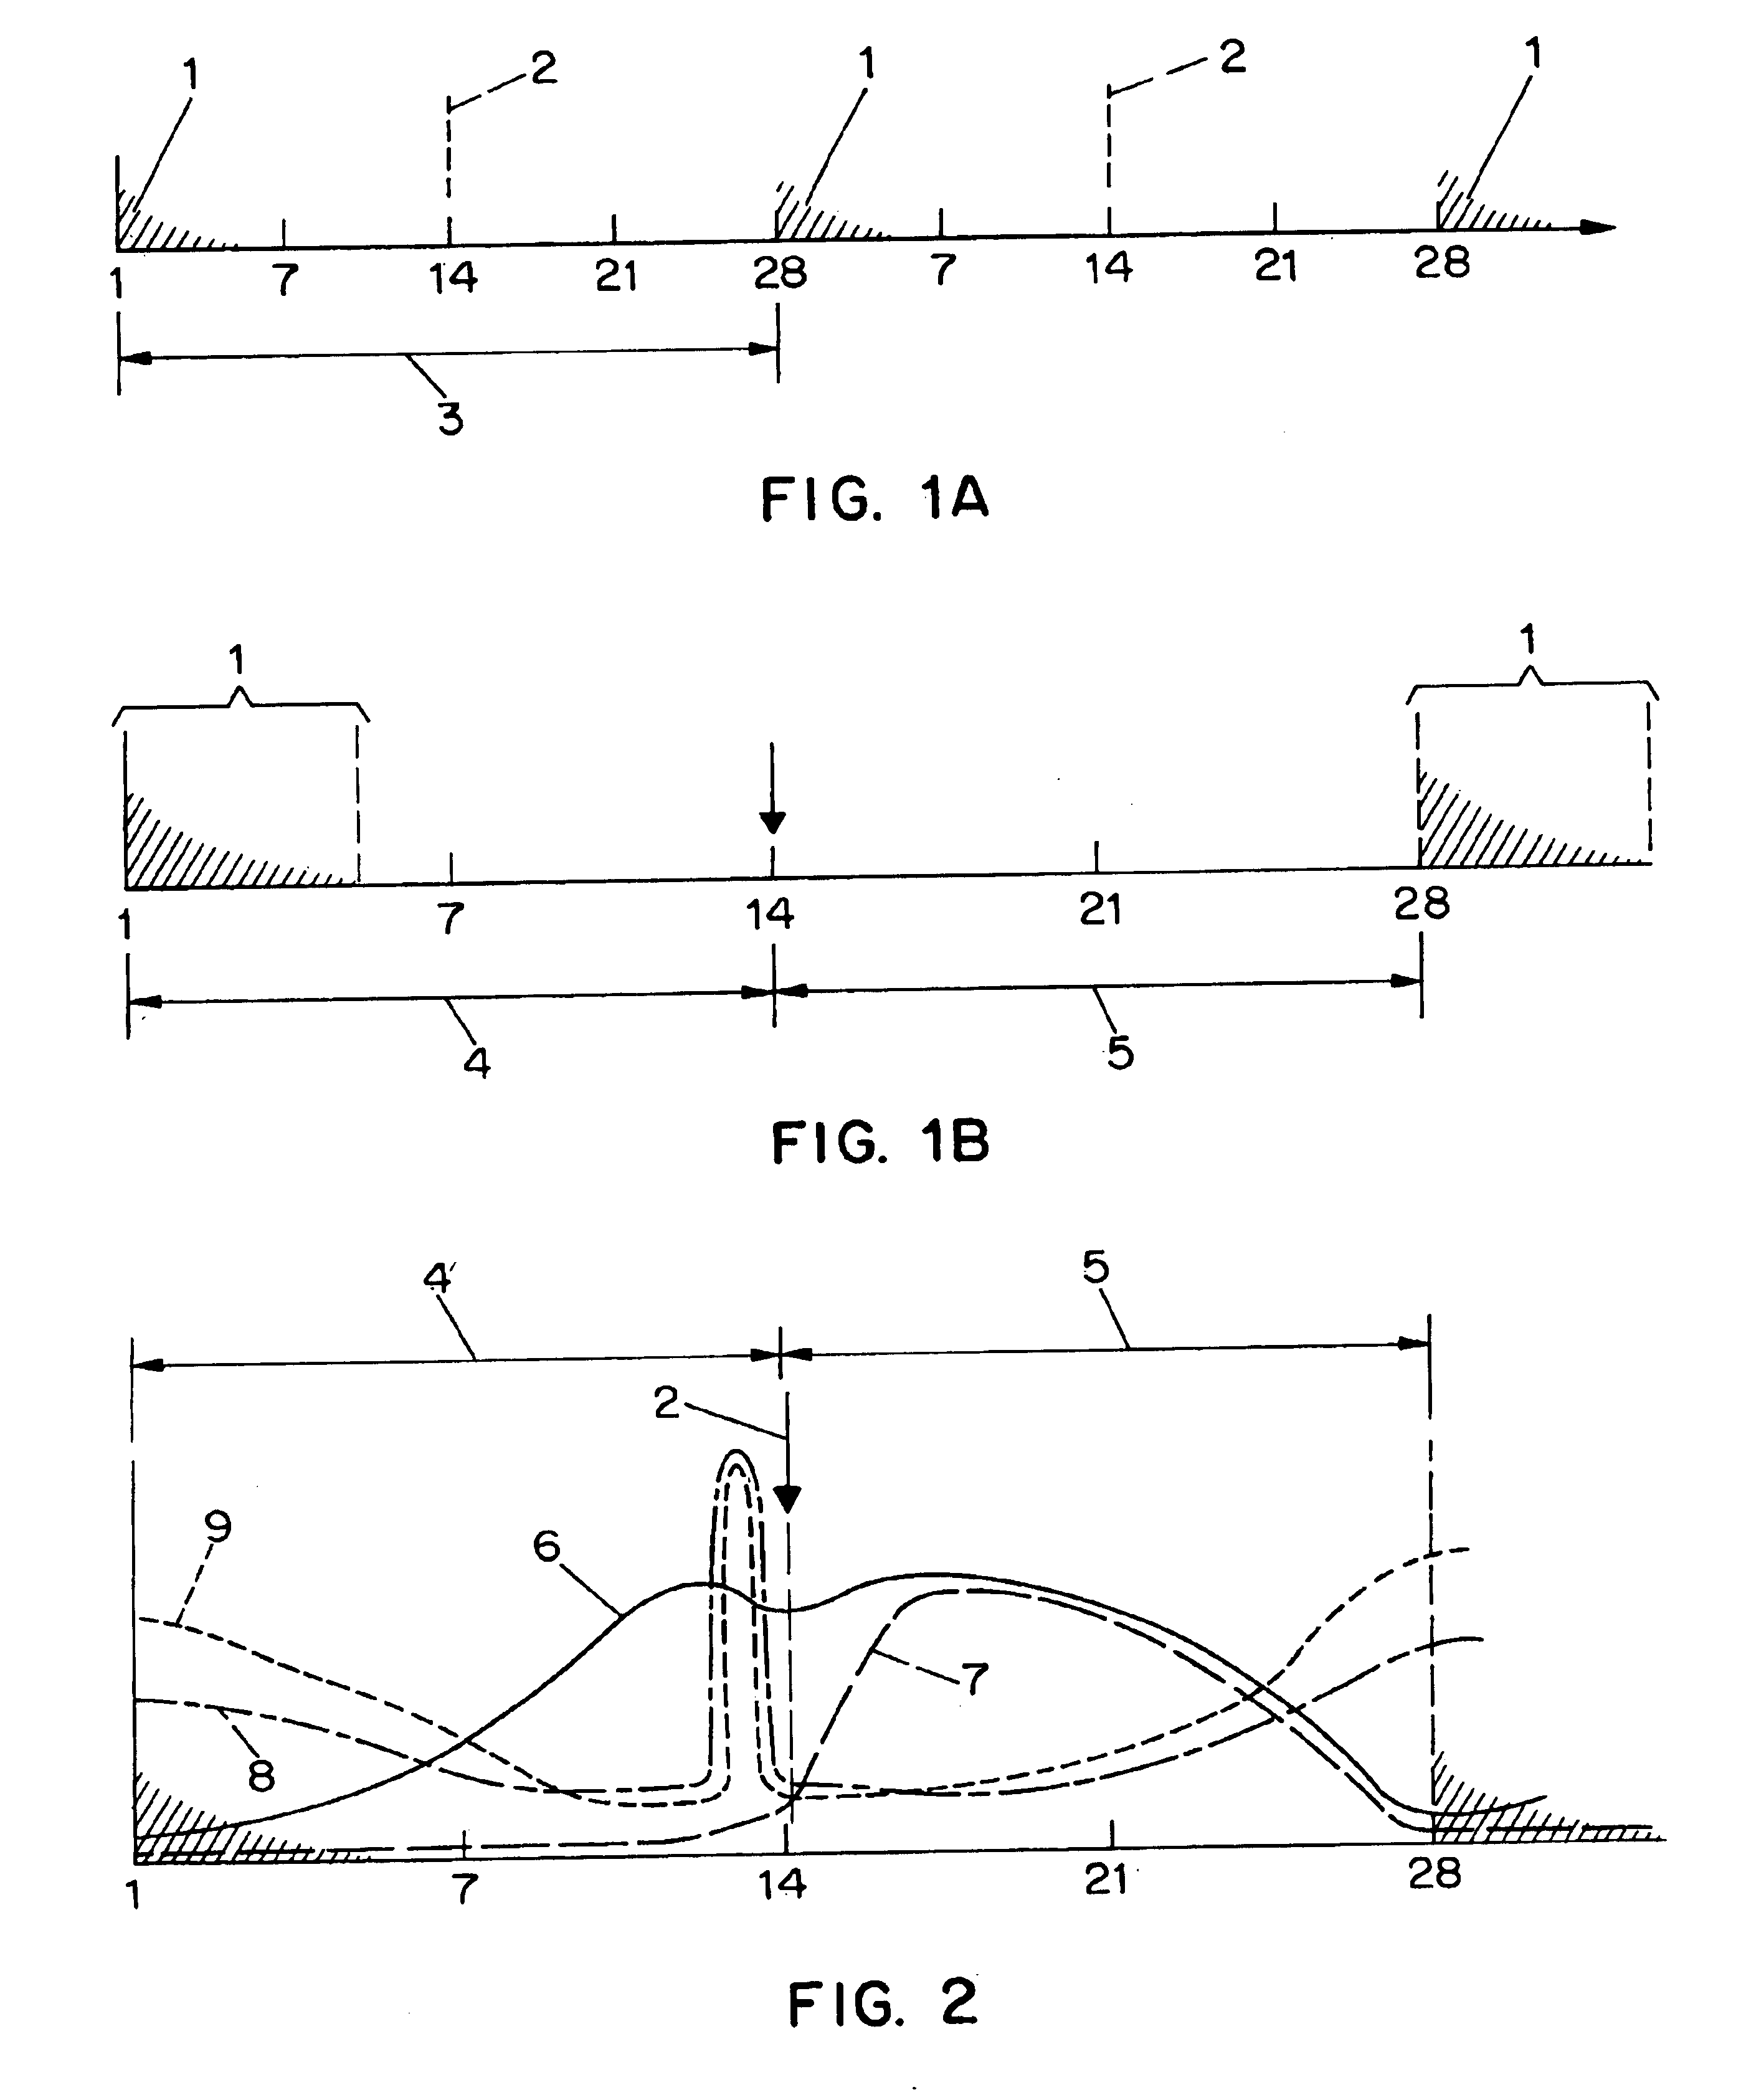 Apparatus for calculating time periods